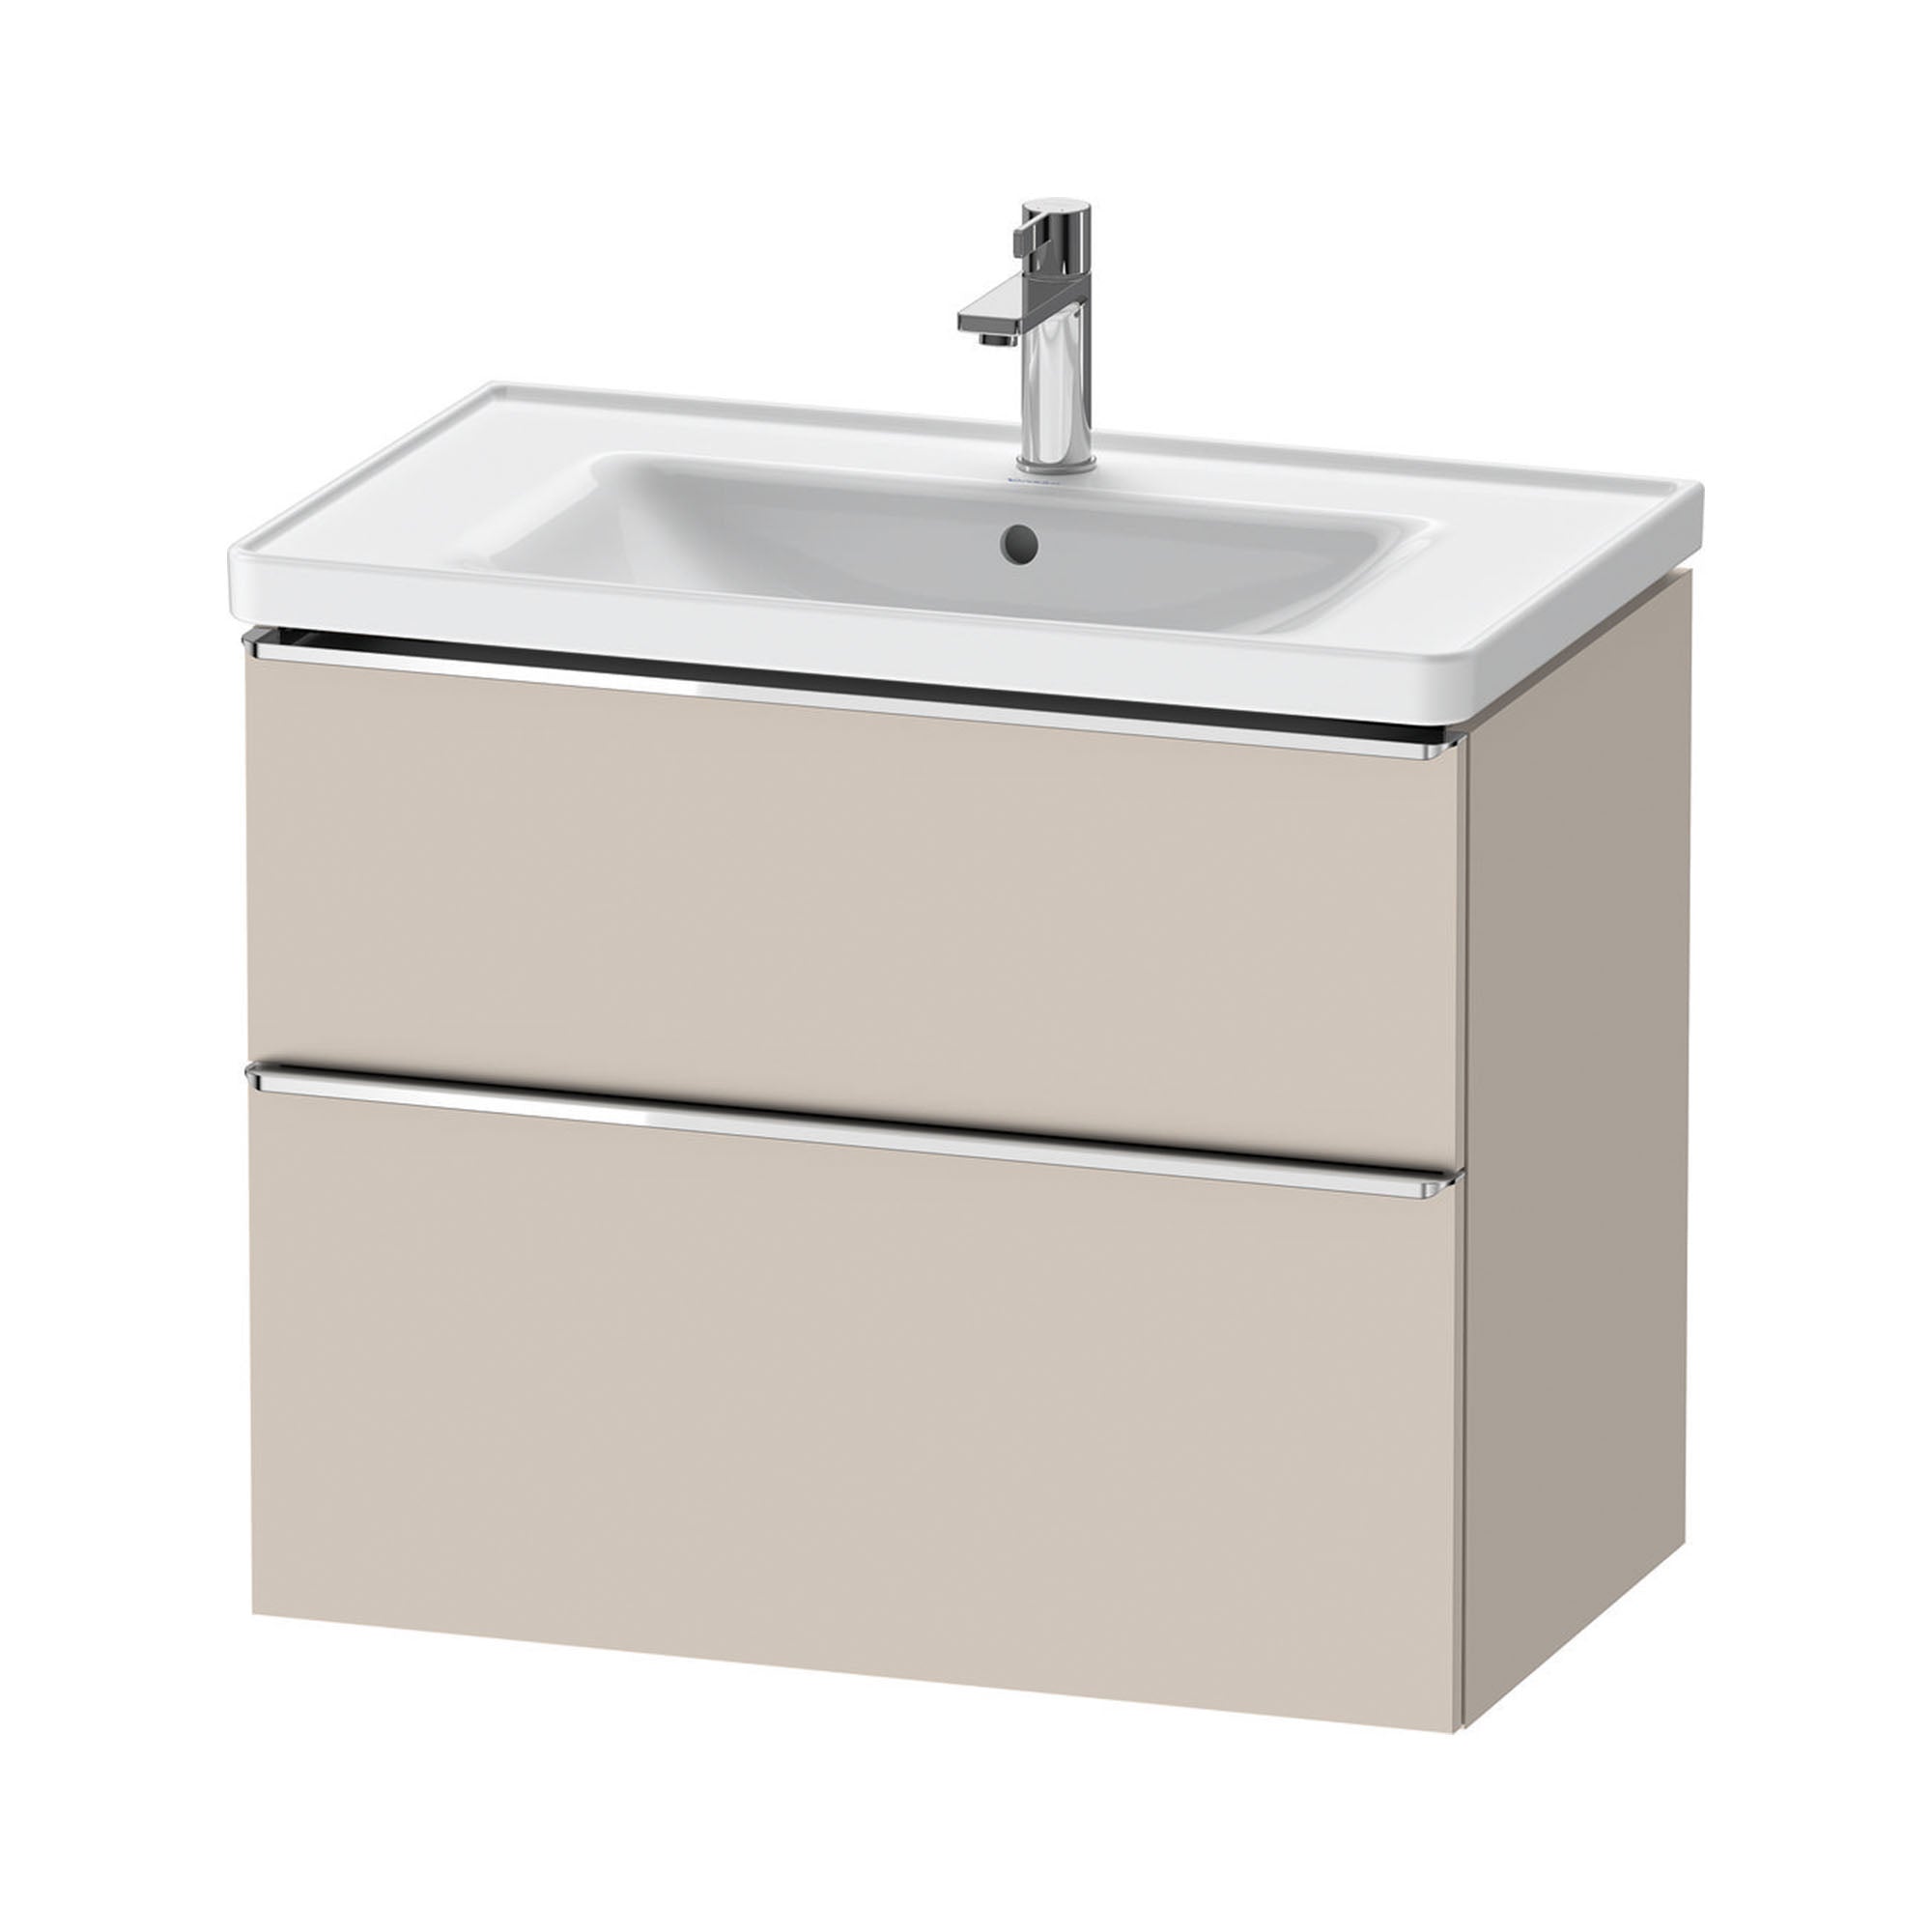 duravit d-neo 800mm wall mounted vanity unit with d-neo basin taupe chrome handles